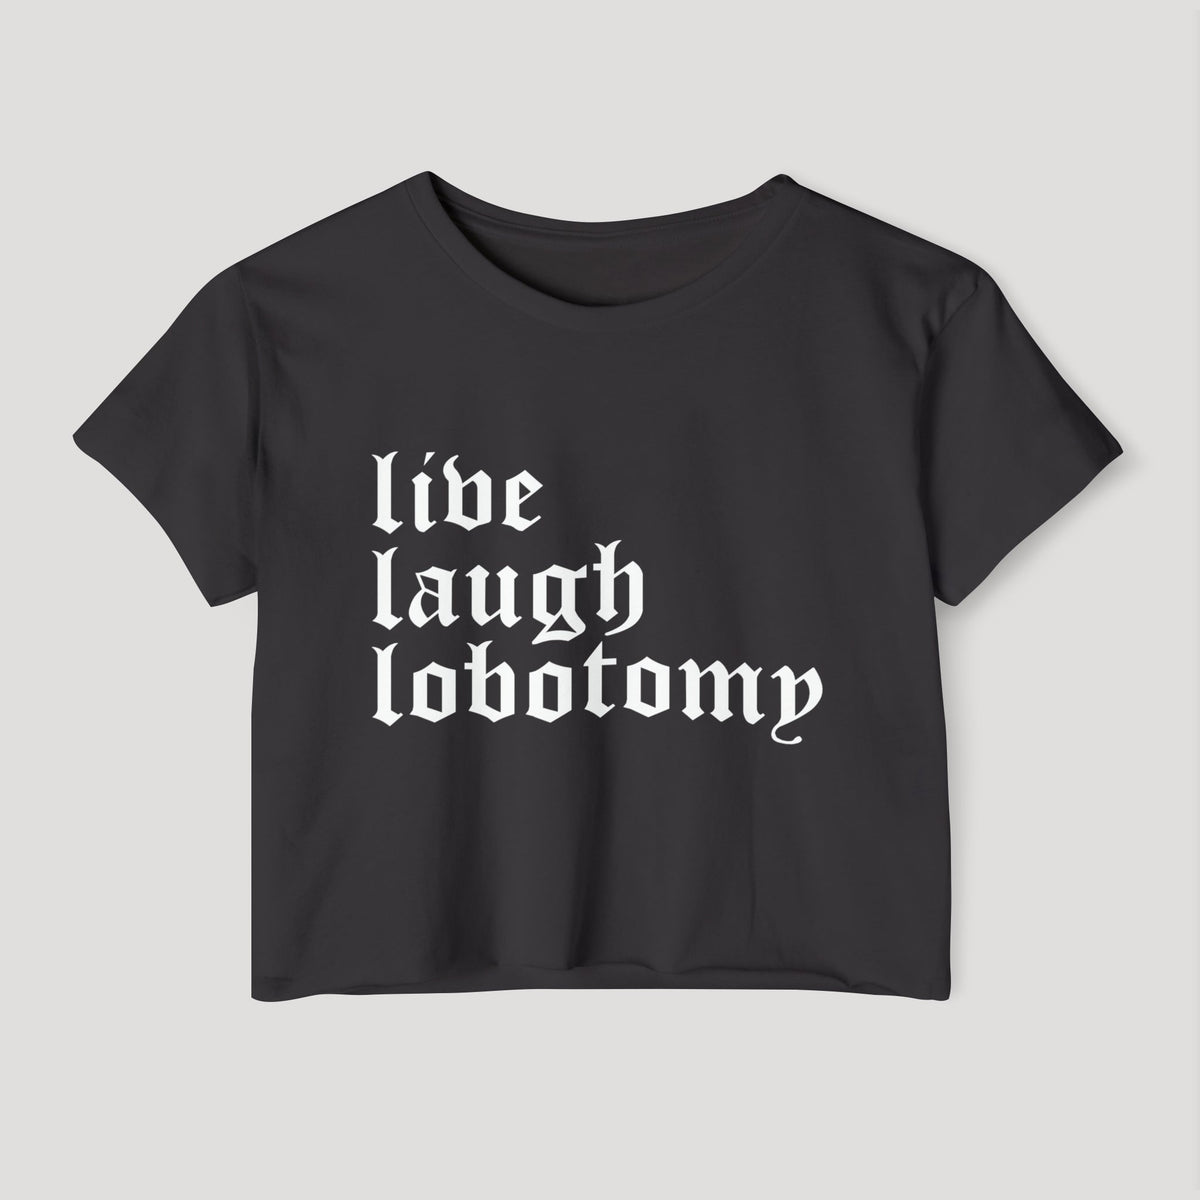 Live Laugh Lobotomy Women's Lightweight Crop Top (READY TO SHIP) - Goth Cloth Co.20923445789992698000